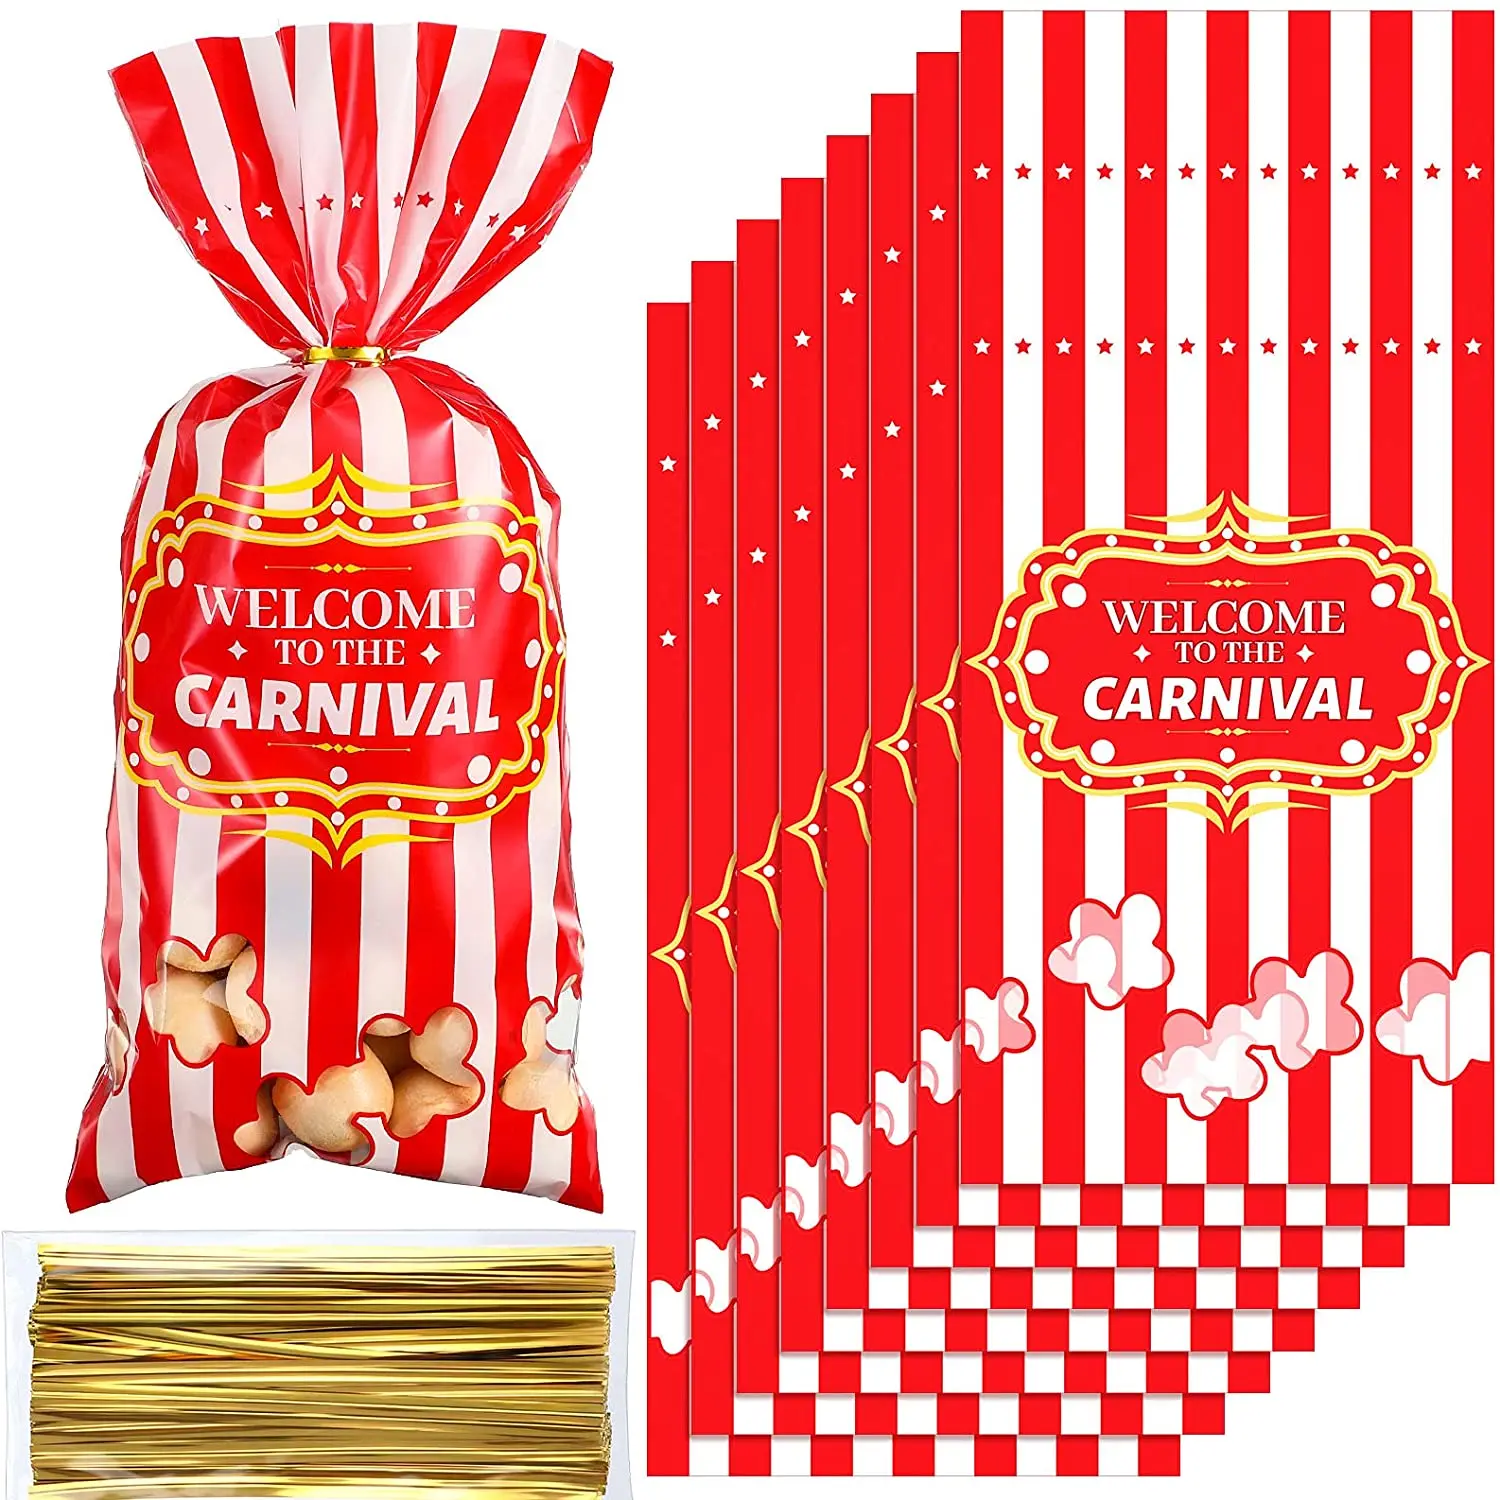 30 Pcs Popcorn Boxes775 Inches Tall  Holds 46 Oz Popcorn  ContainersFashion Design Red